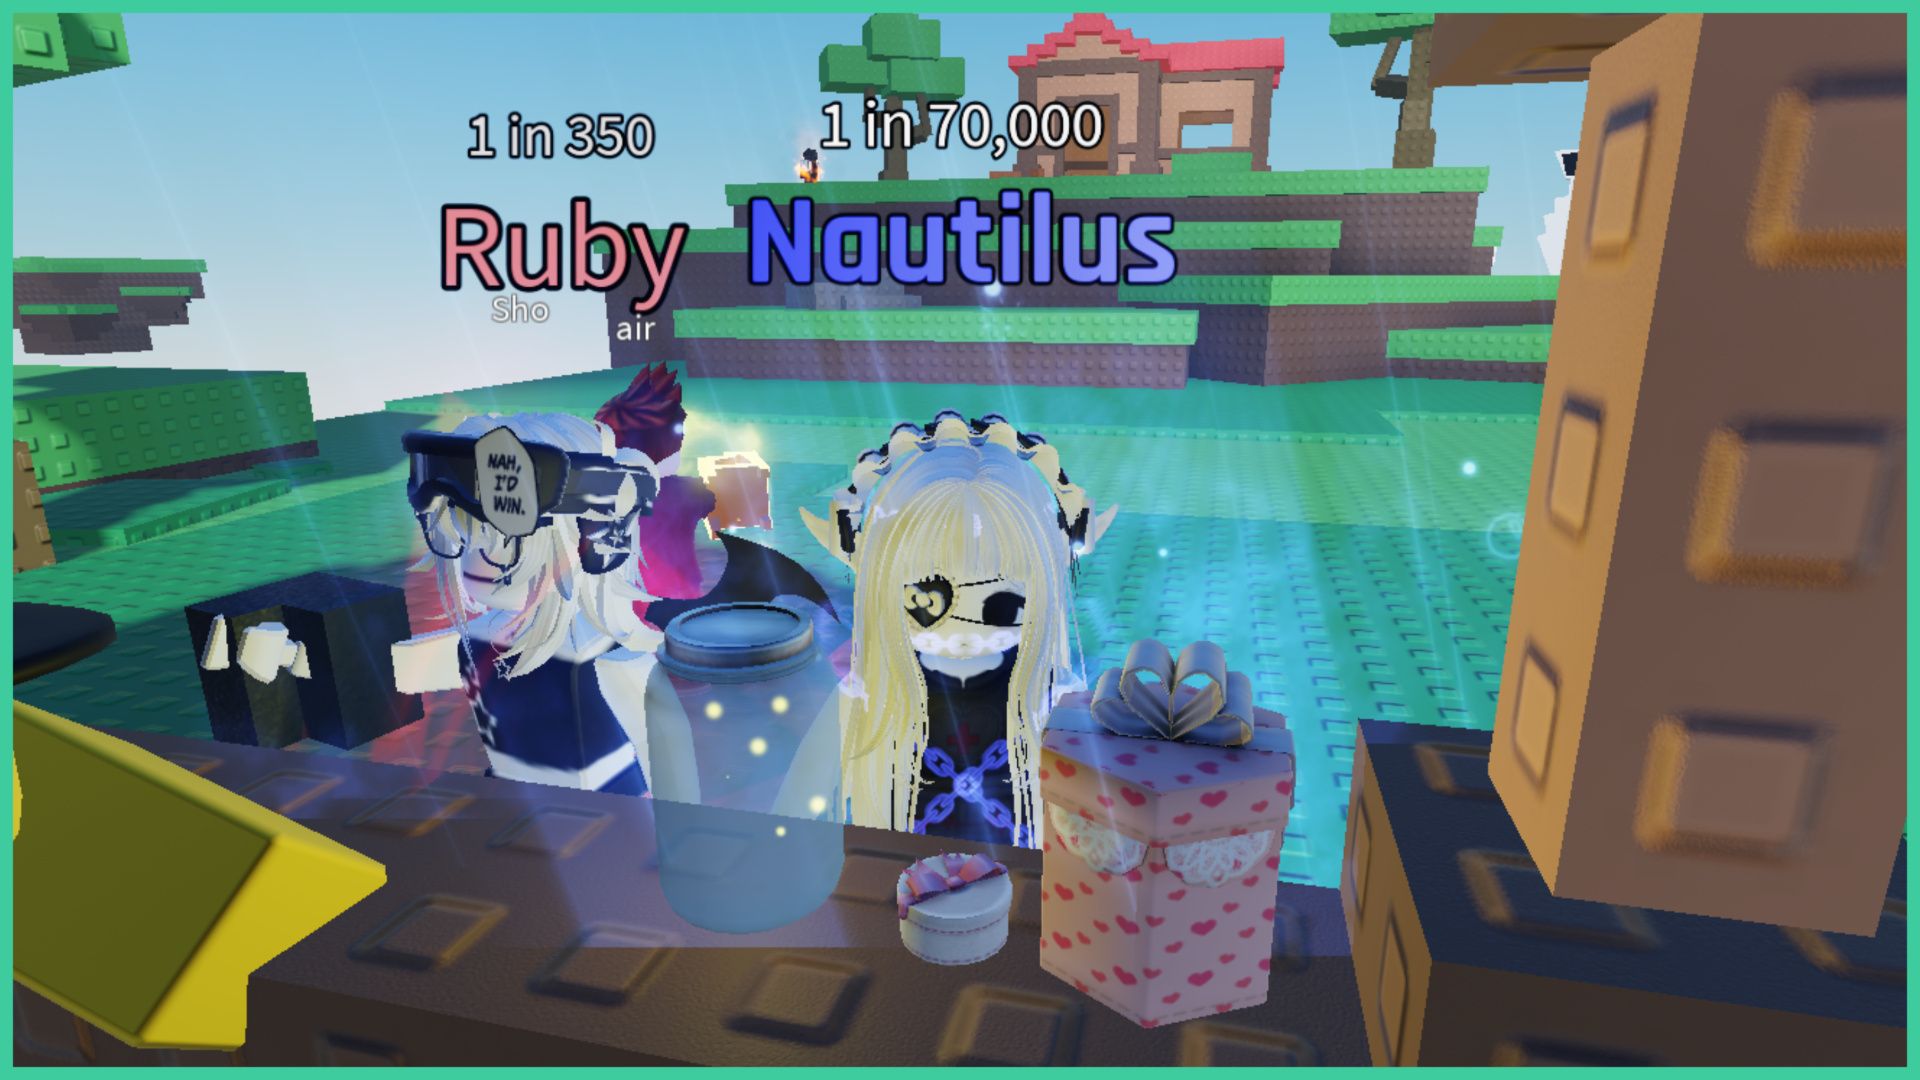 feature image for our how to get lunar in sols rng, there are two roblox characters standing at the jake's workshop stall which has various items on the counter including a glass jar, and a wrapped present, in the background there is a house on a hill with some trees